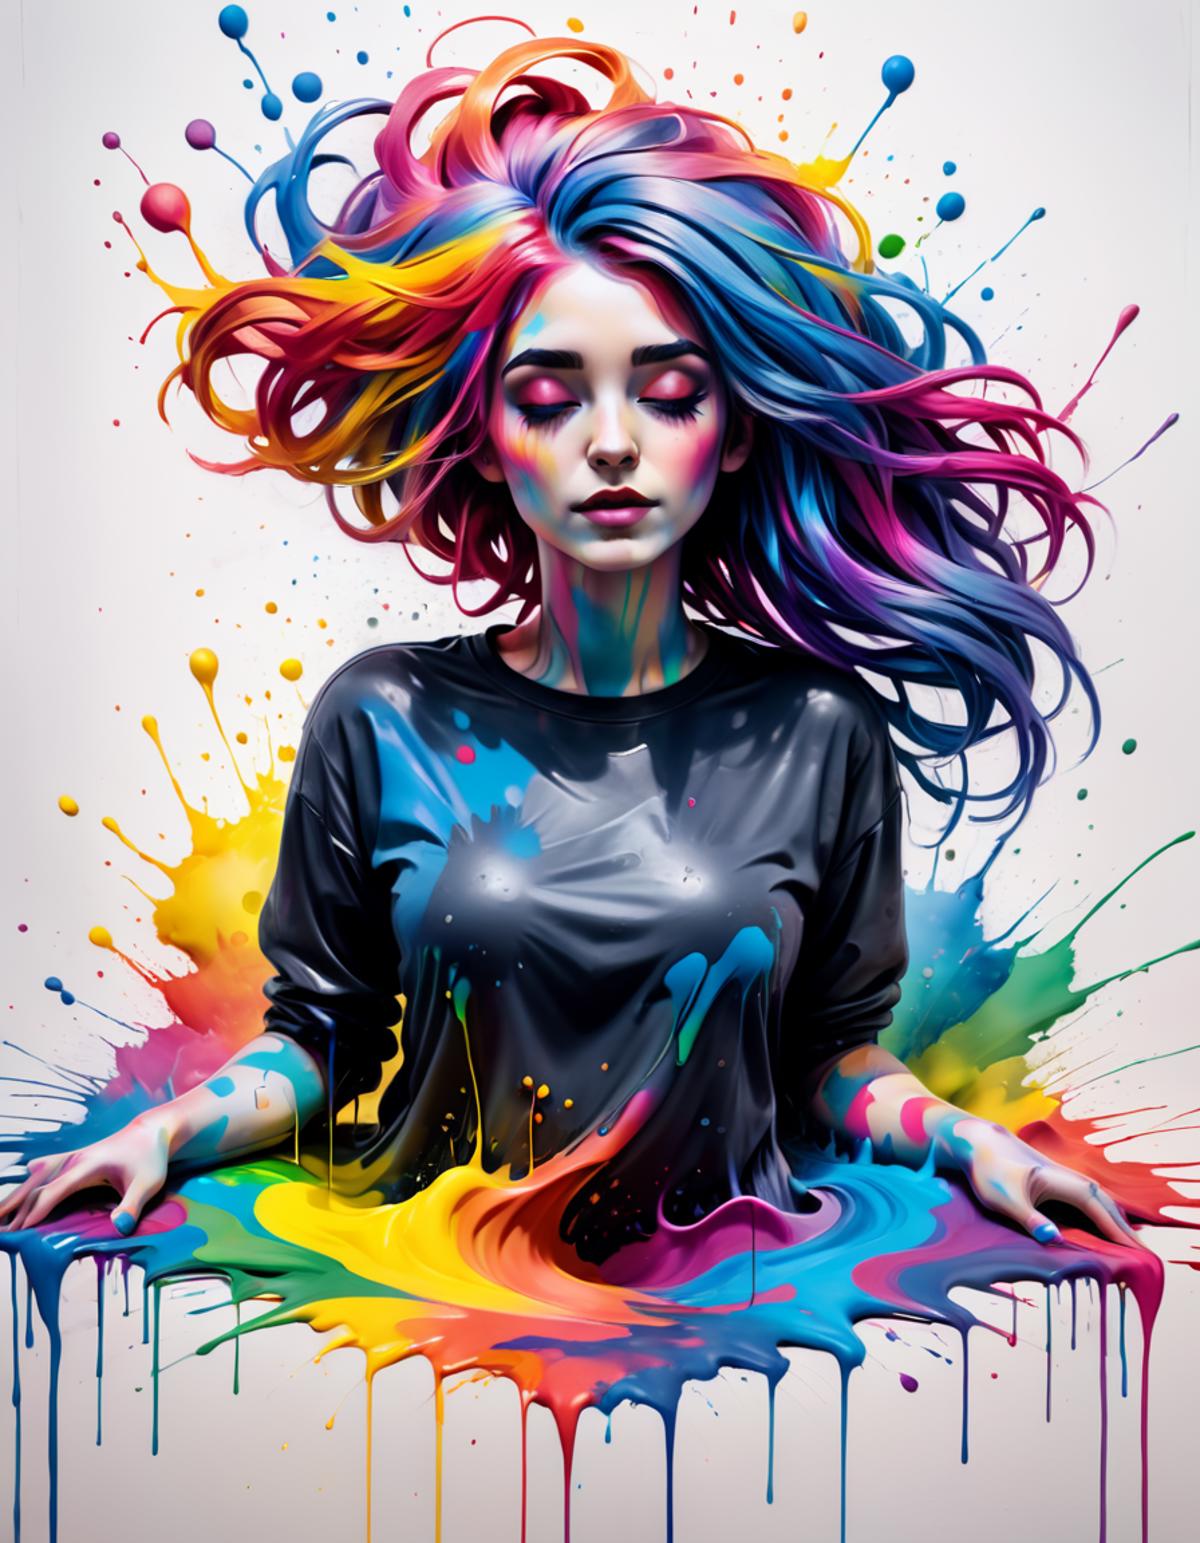 A woman with colorful hair and a black shirt appears to be drenched in paint, with a colorful background.